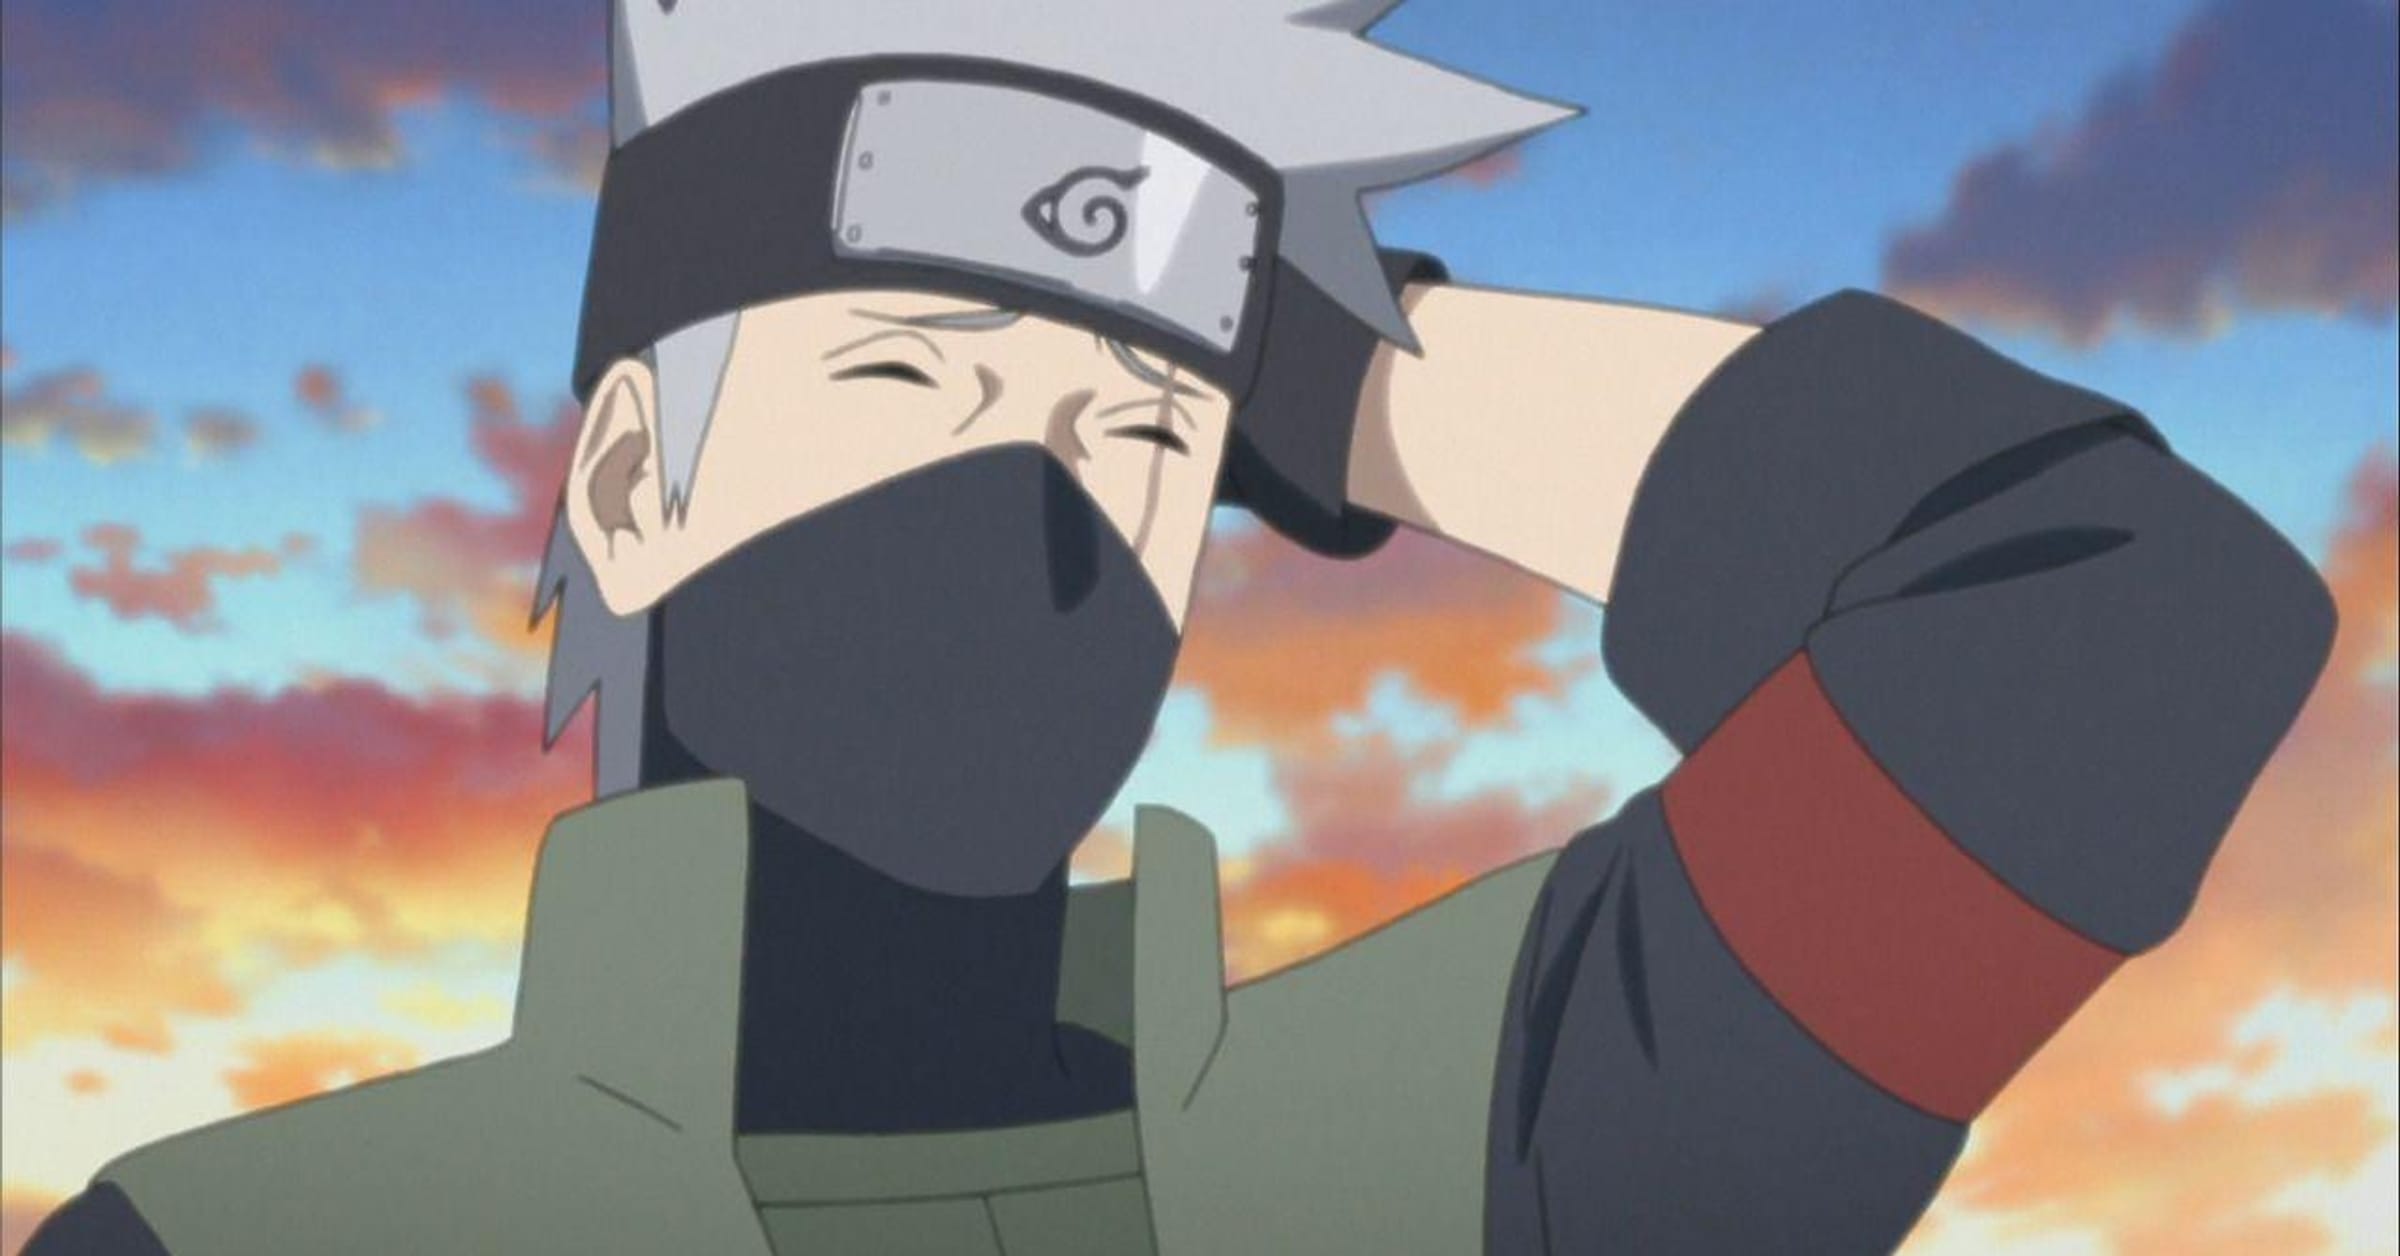 Is the Uchiha clan more hated or loved among the Naruto fandom? Or